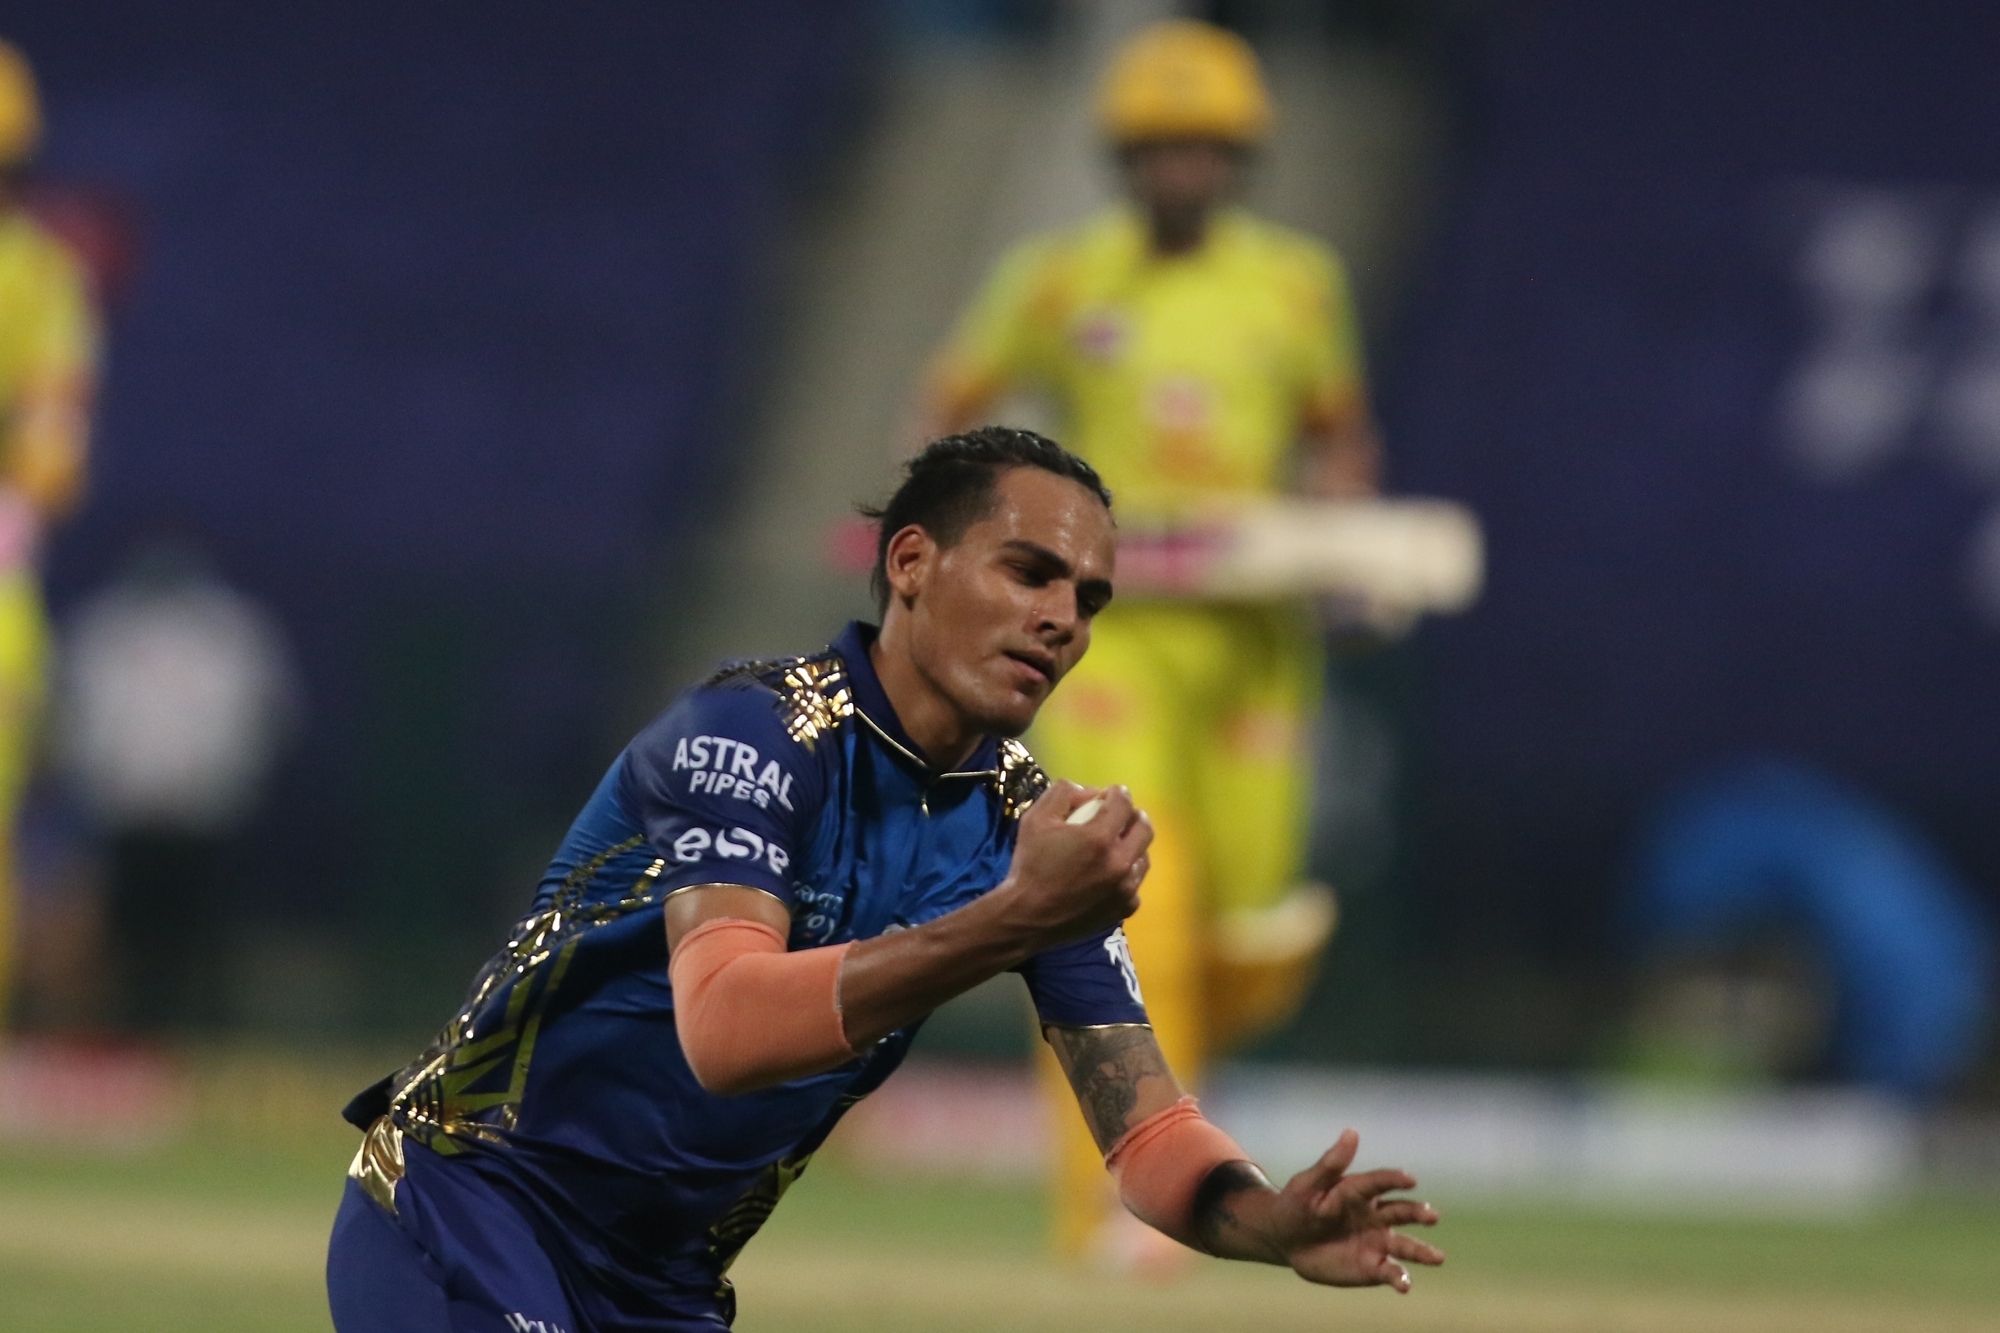 Ipl 2020 Rahul Chahar Relishes Bowling On Slow Pitches And Bigger Grounds Of Uae